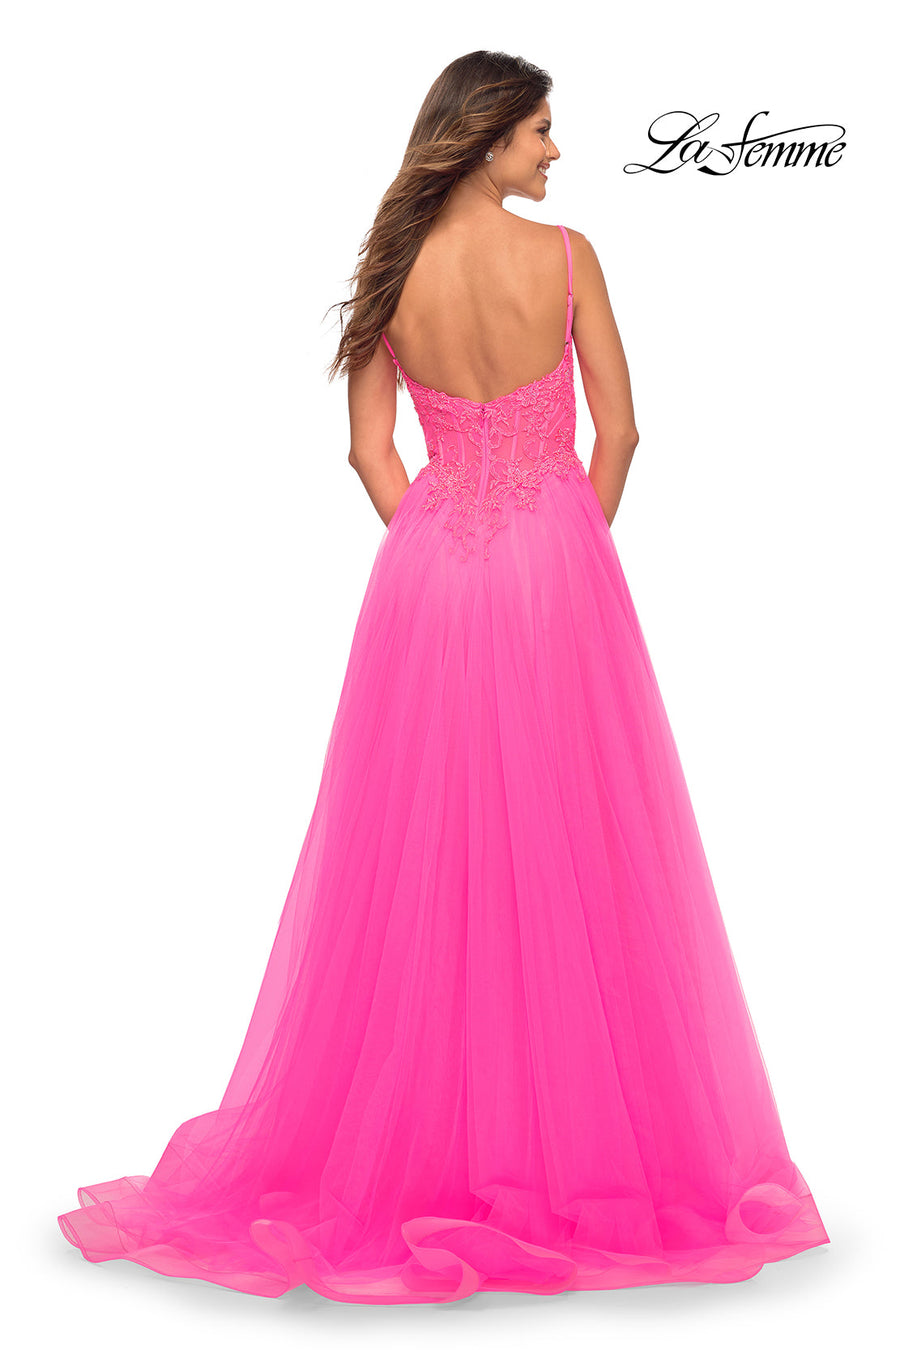 La Femme 30755 prom dress images.  La Femme 30755 is available in these colors: Neon Pink.